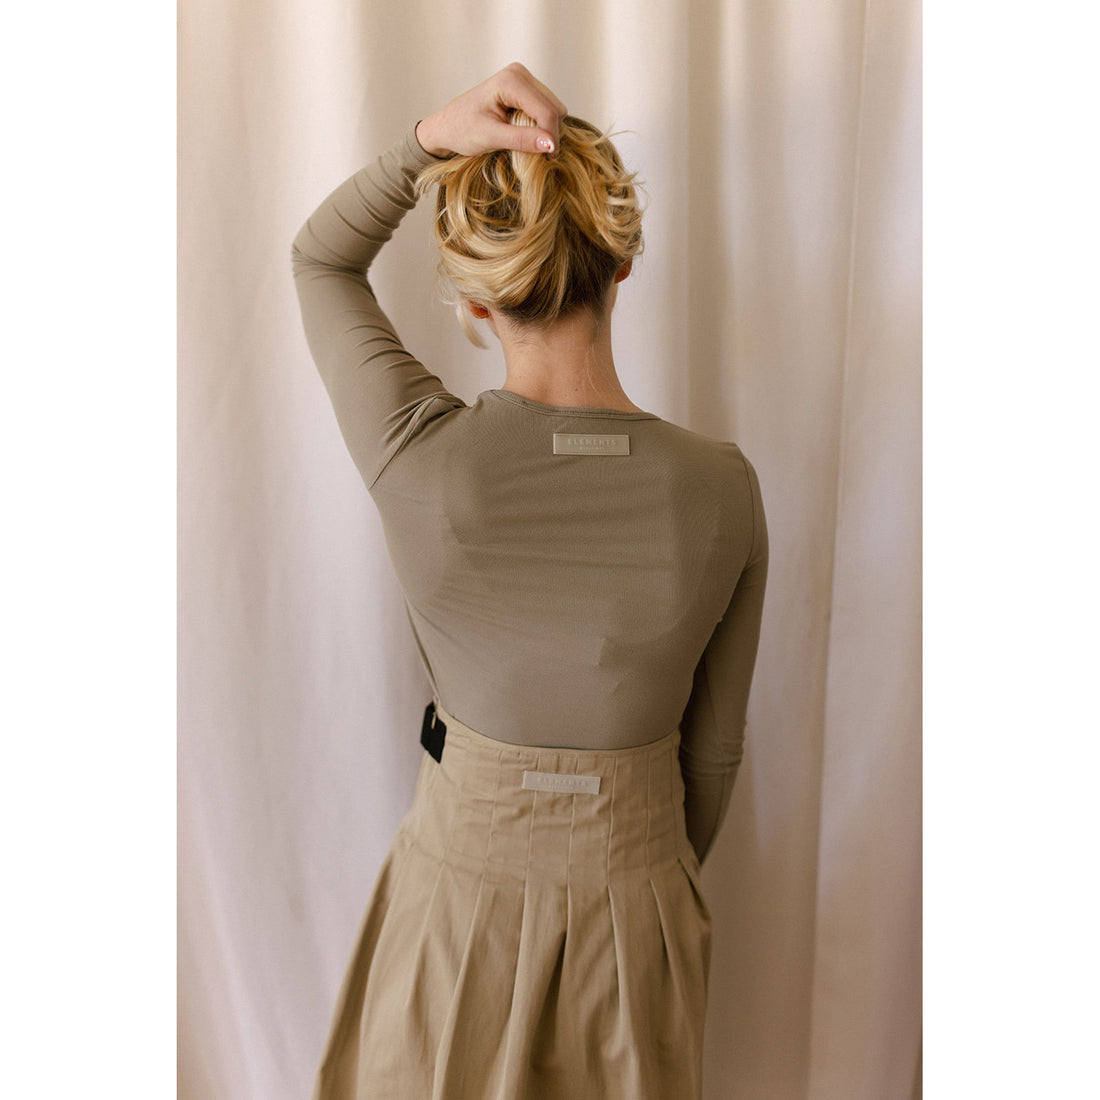 Elements Olive Buckle Pleat Skirt